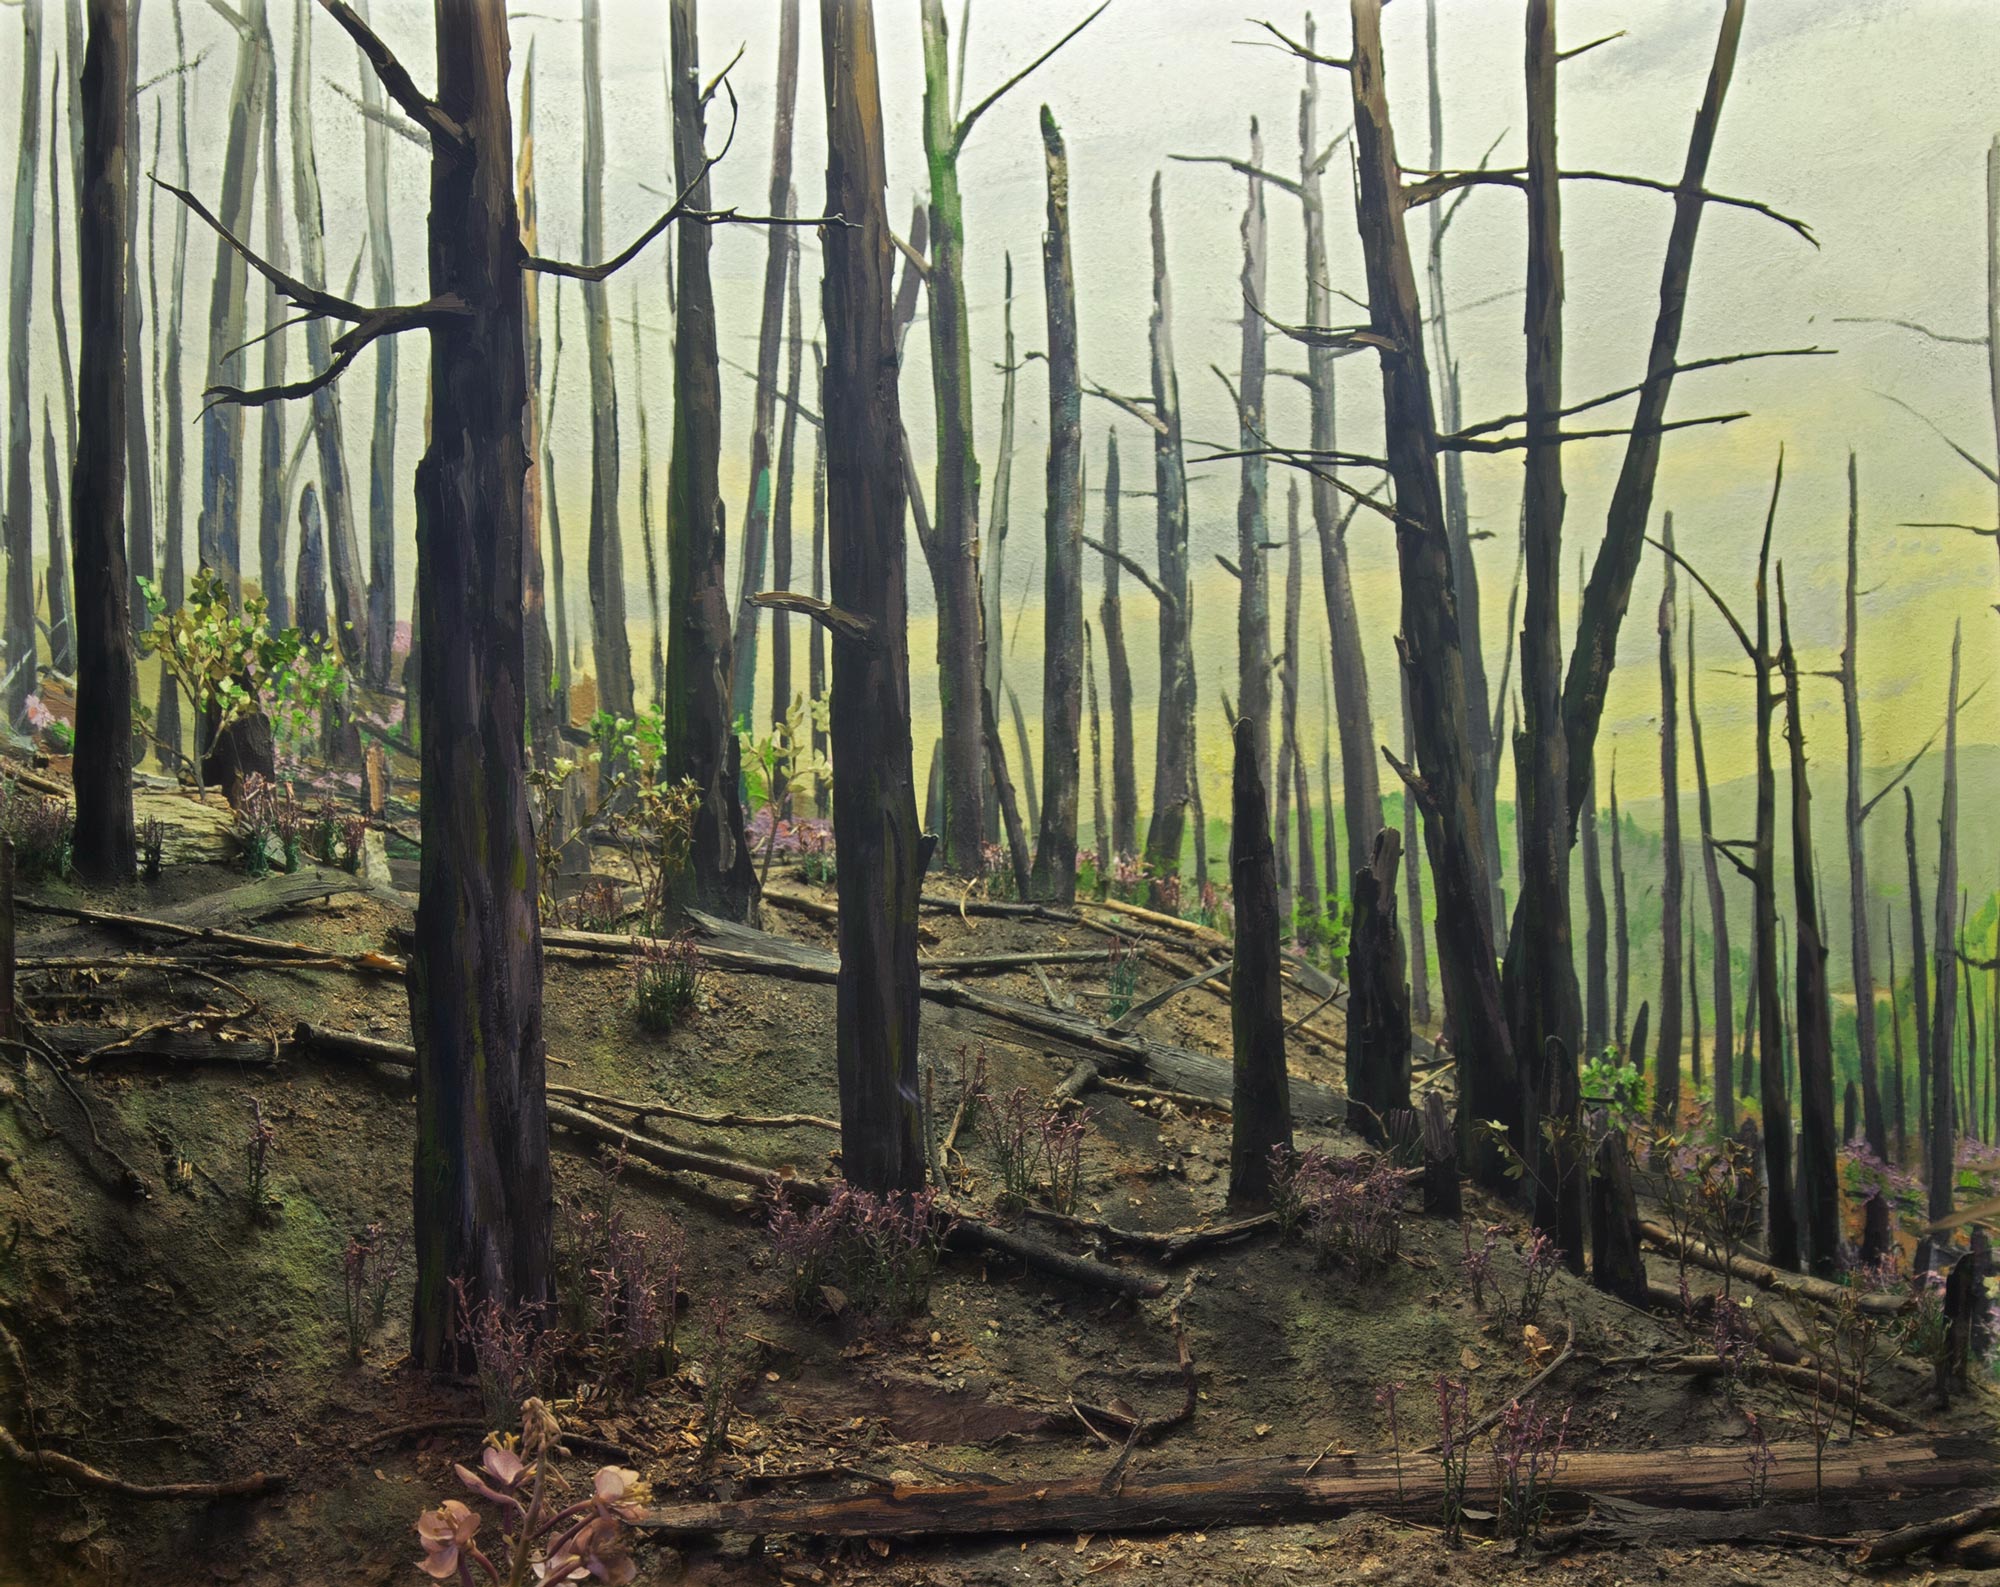 Diorama showing a forest after a fire.